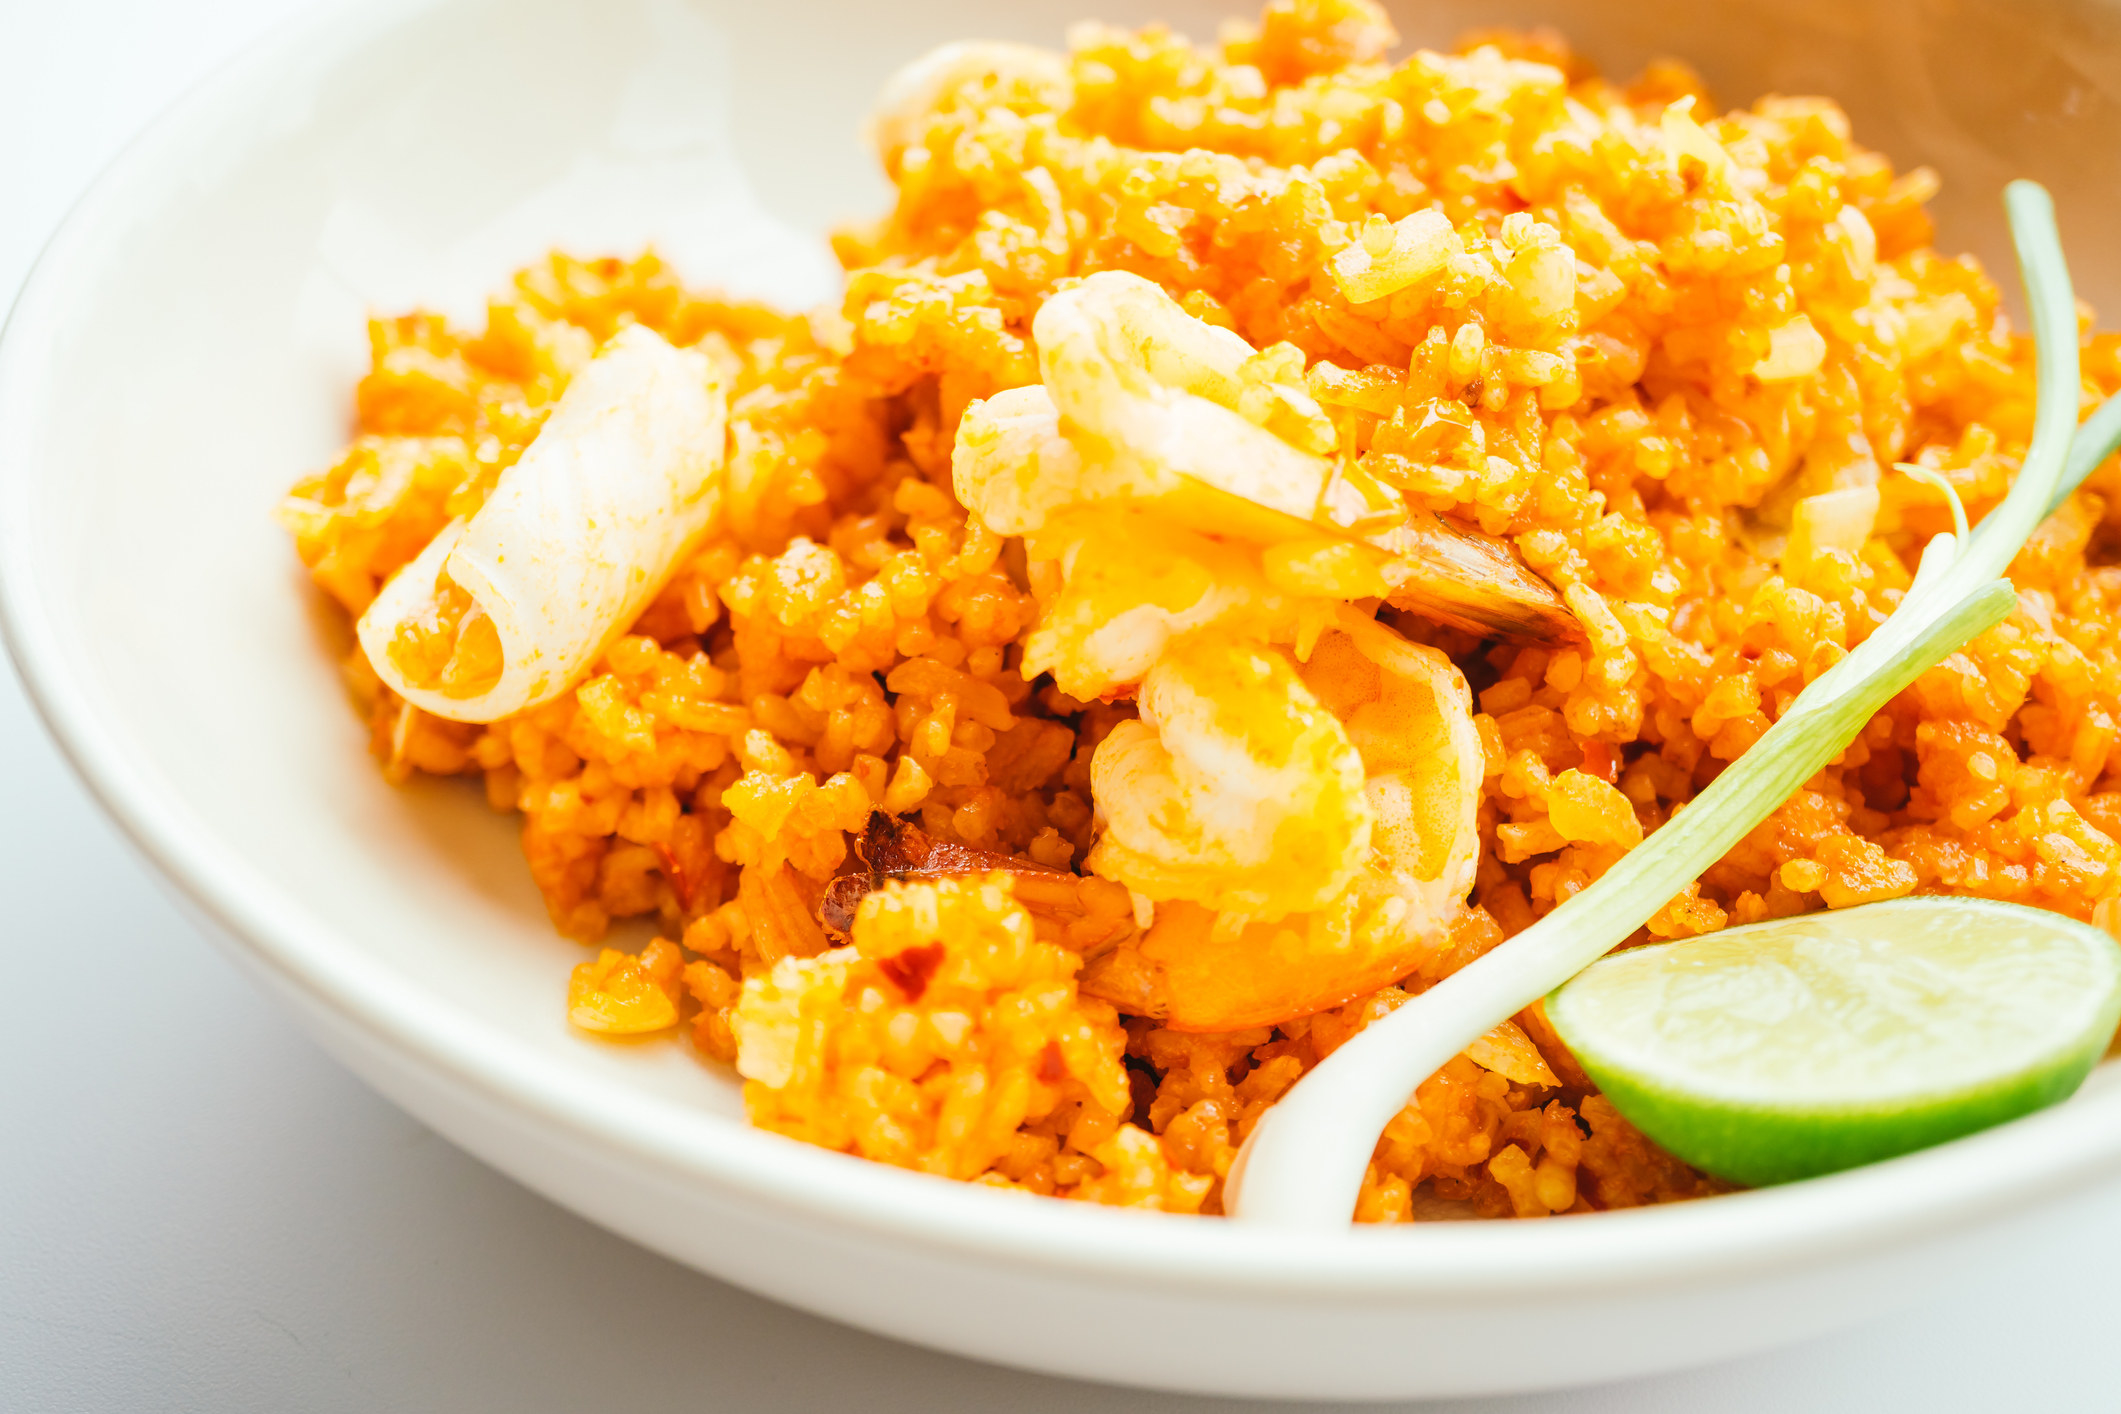 Portuguese-style seafood rice.